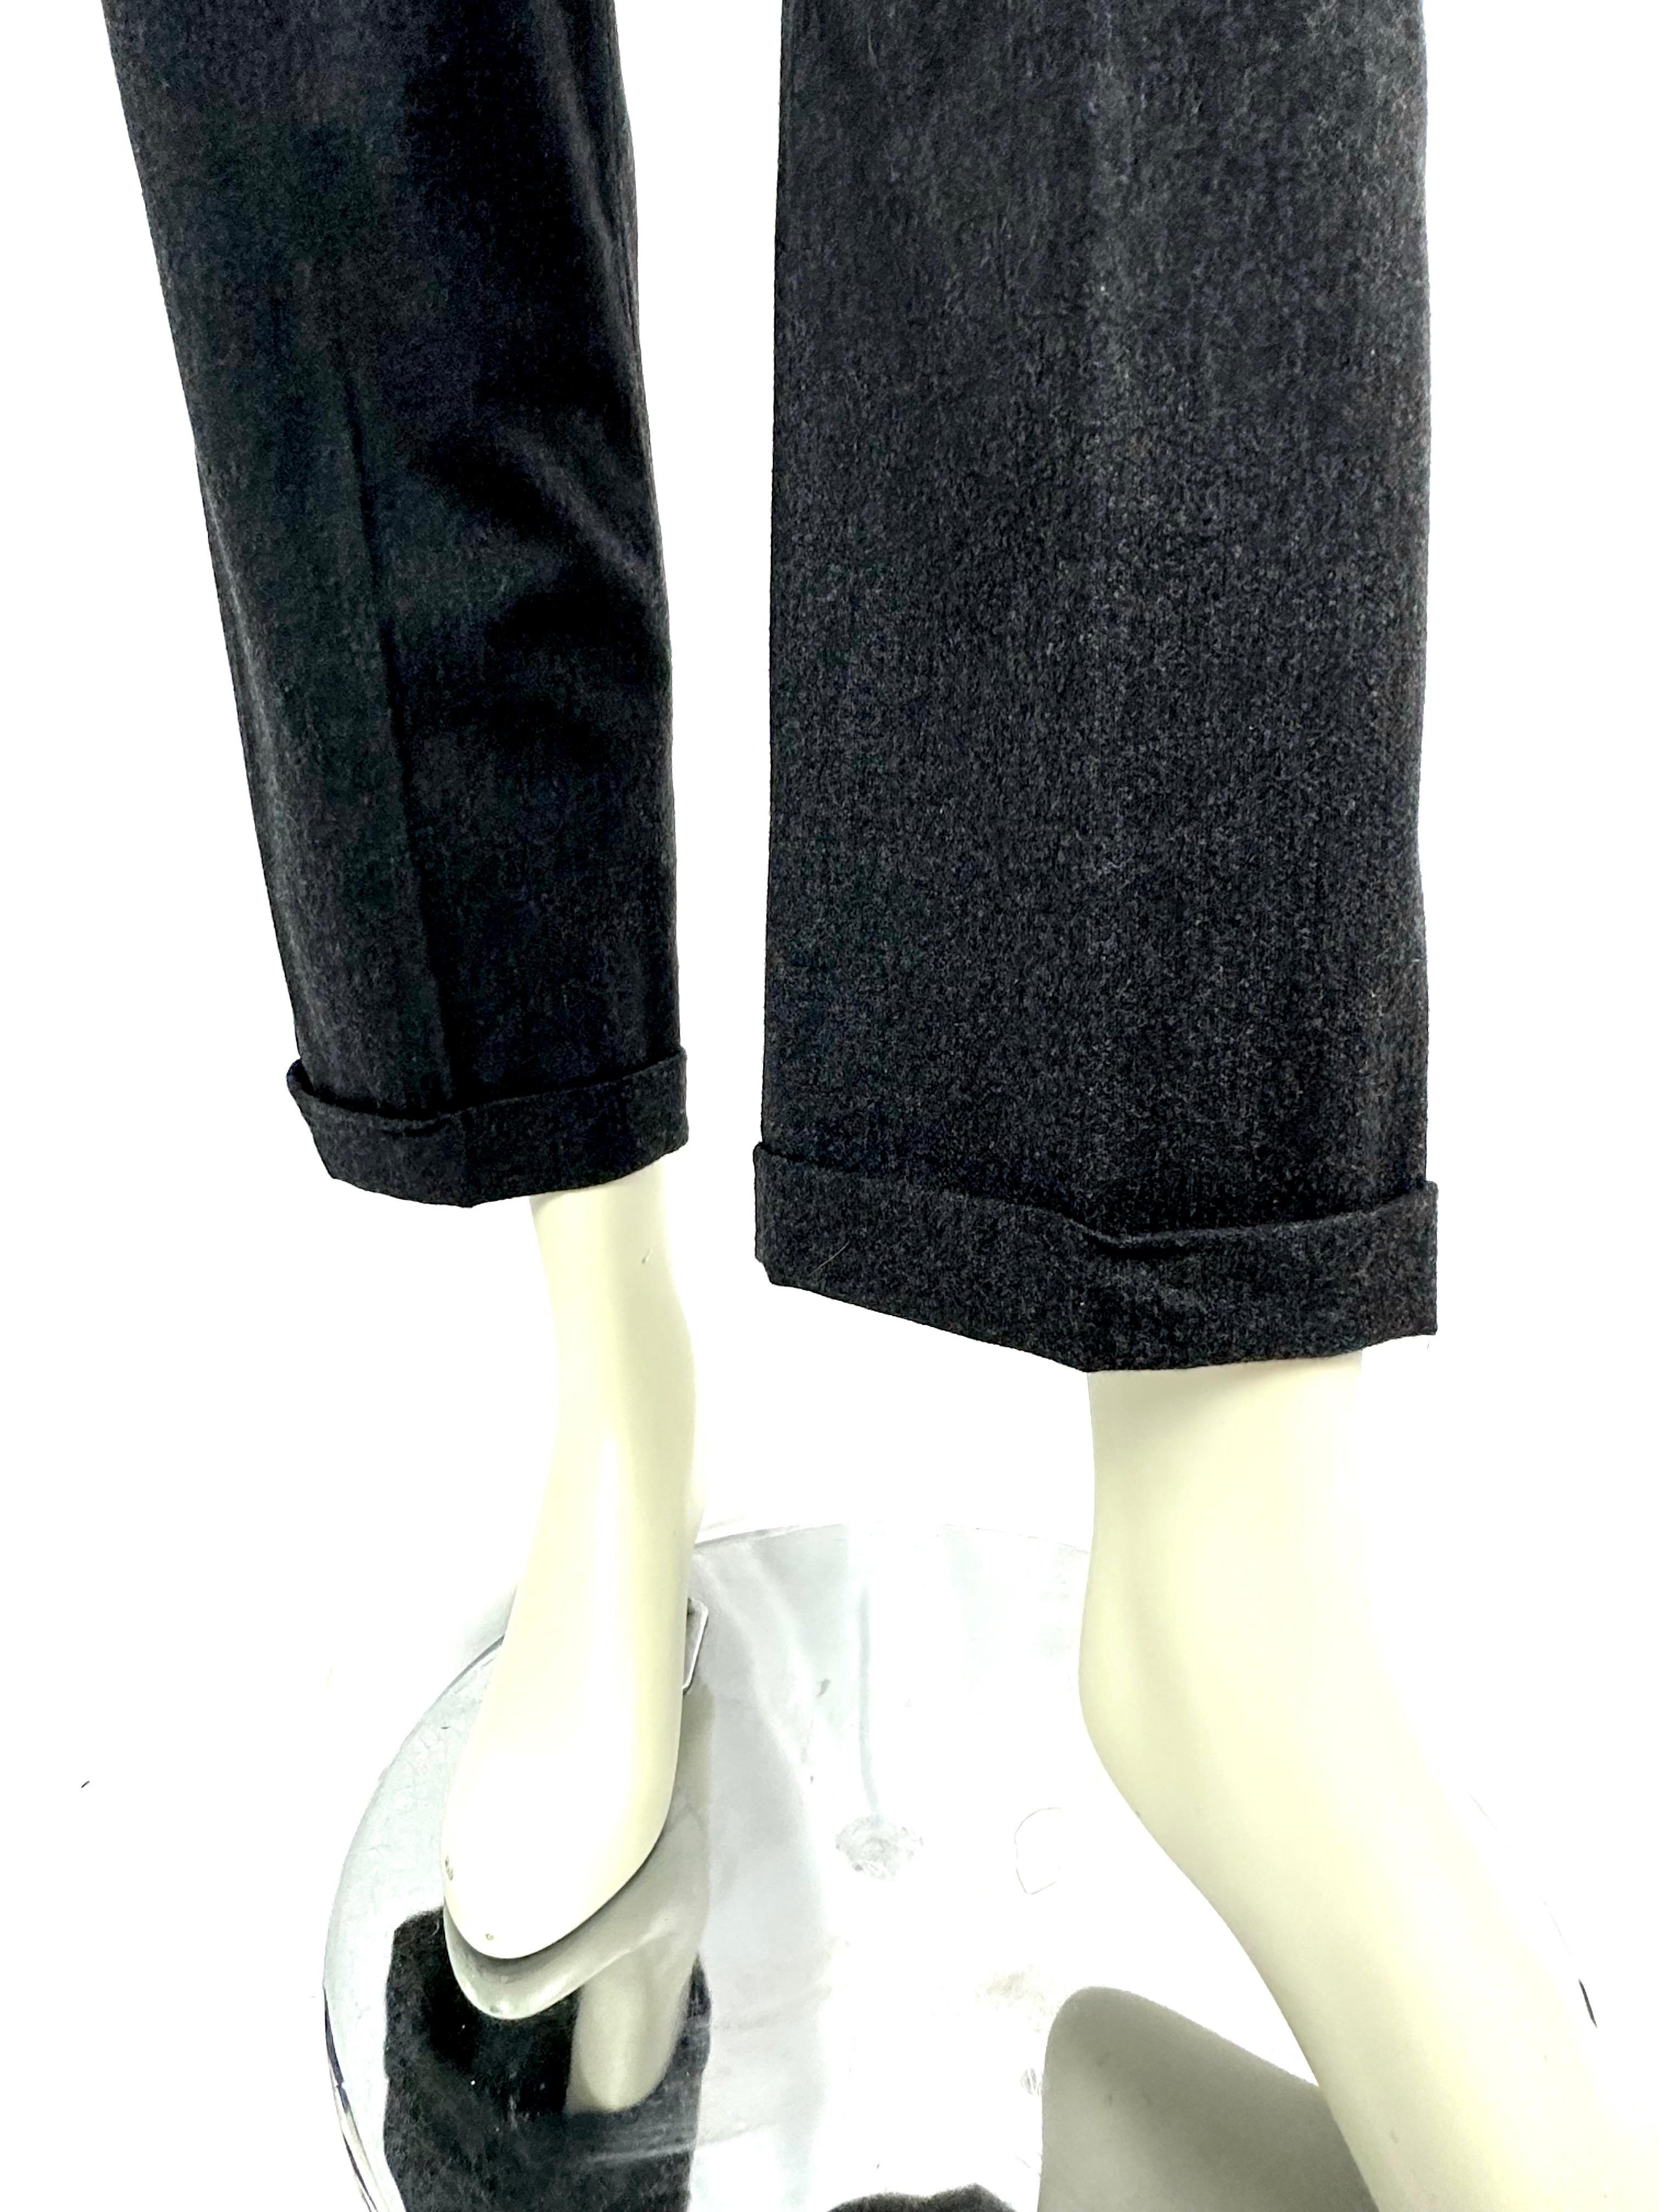 Yves Saint Laurent rive gauche anthracite gray wool pleated trousers from the 1990s.
Patch pockets on the hips.
zipper fly ending with a button.
Small setback.
Unlined.
Absent size label, estimated size 36, refers to measurements.
Size 34cm
Hips